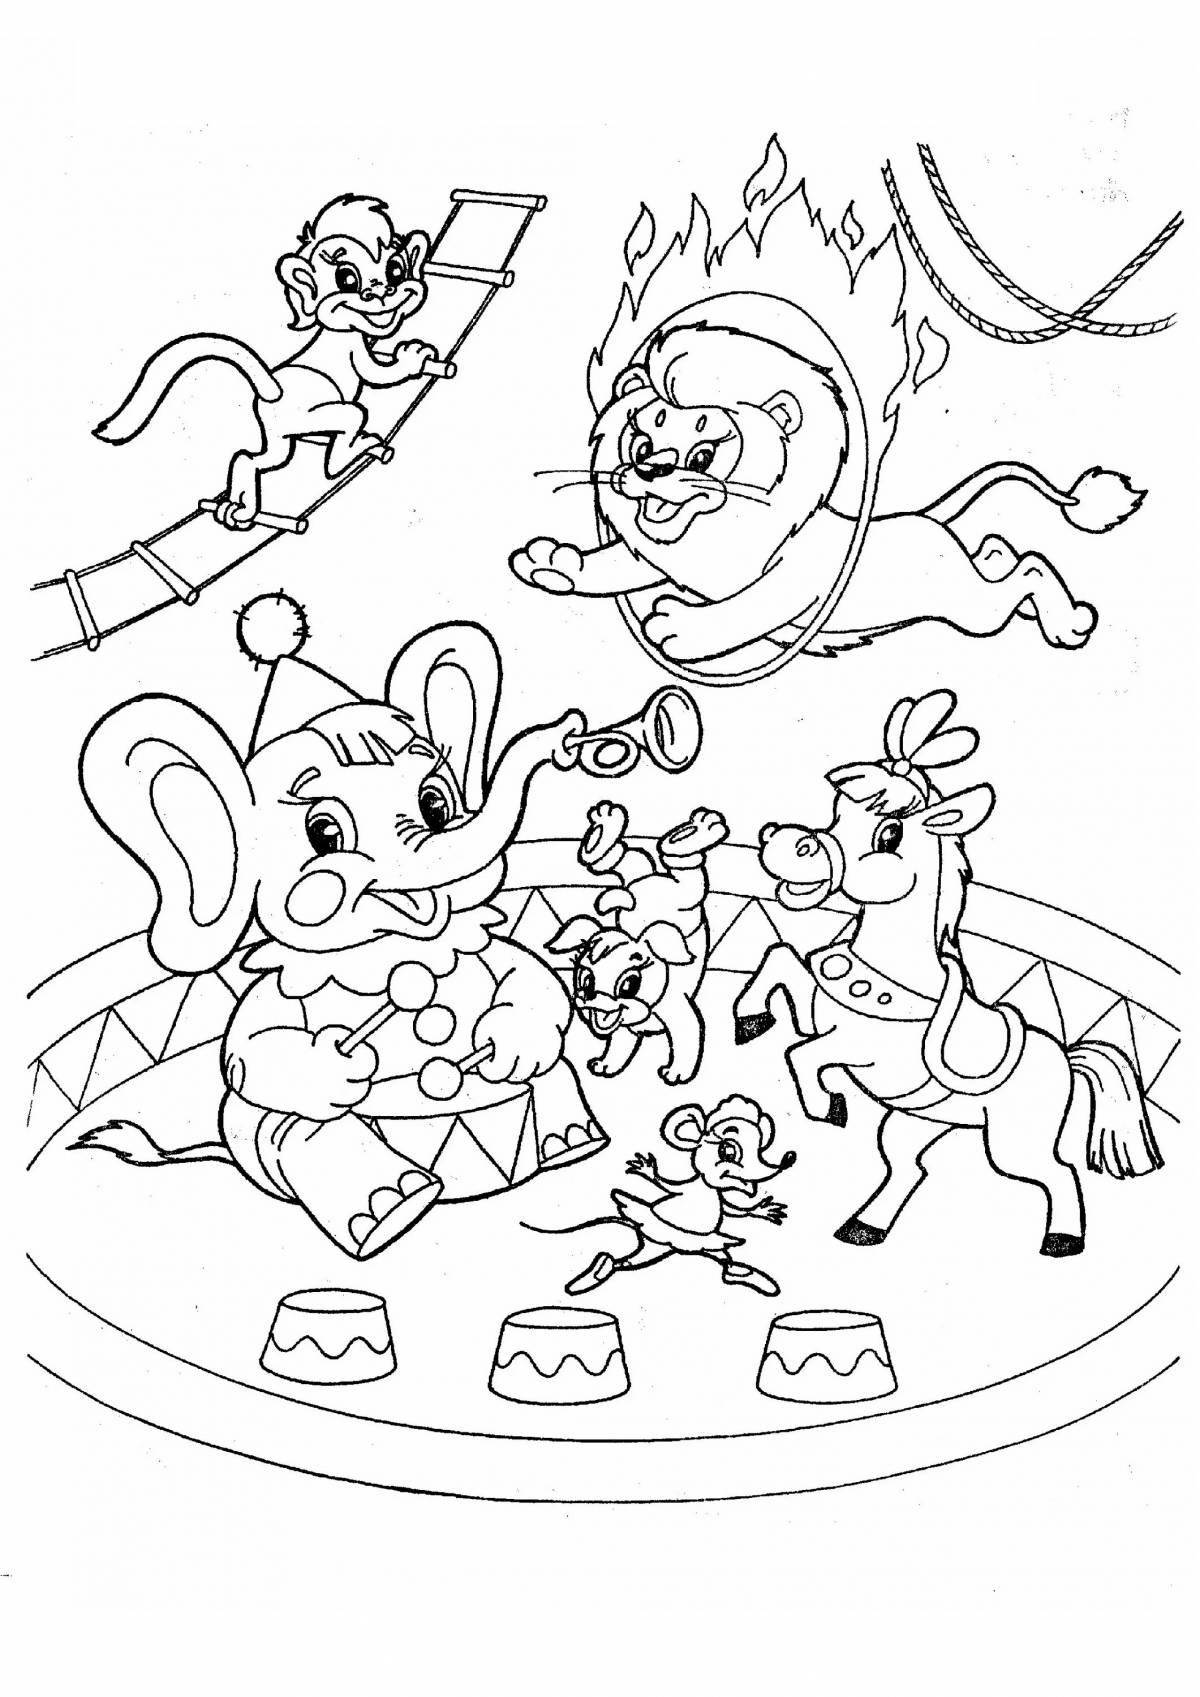 Funny circus coloring book for kids